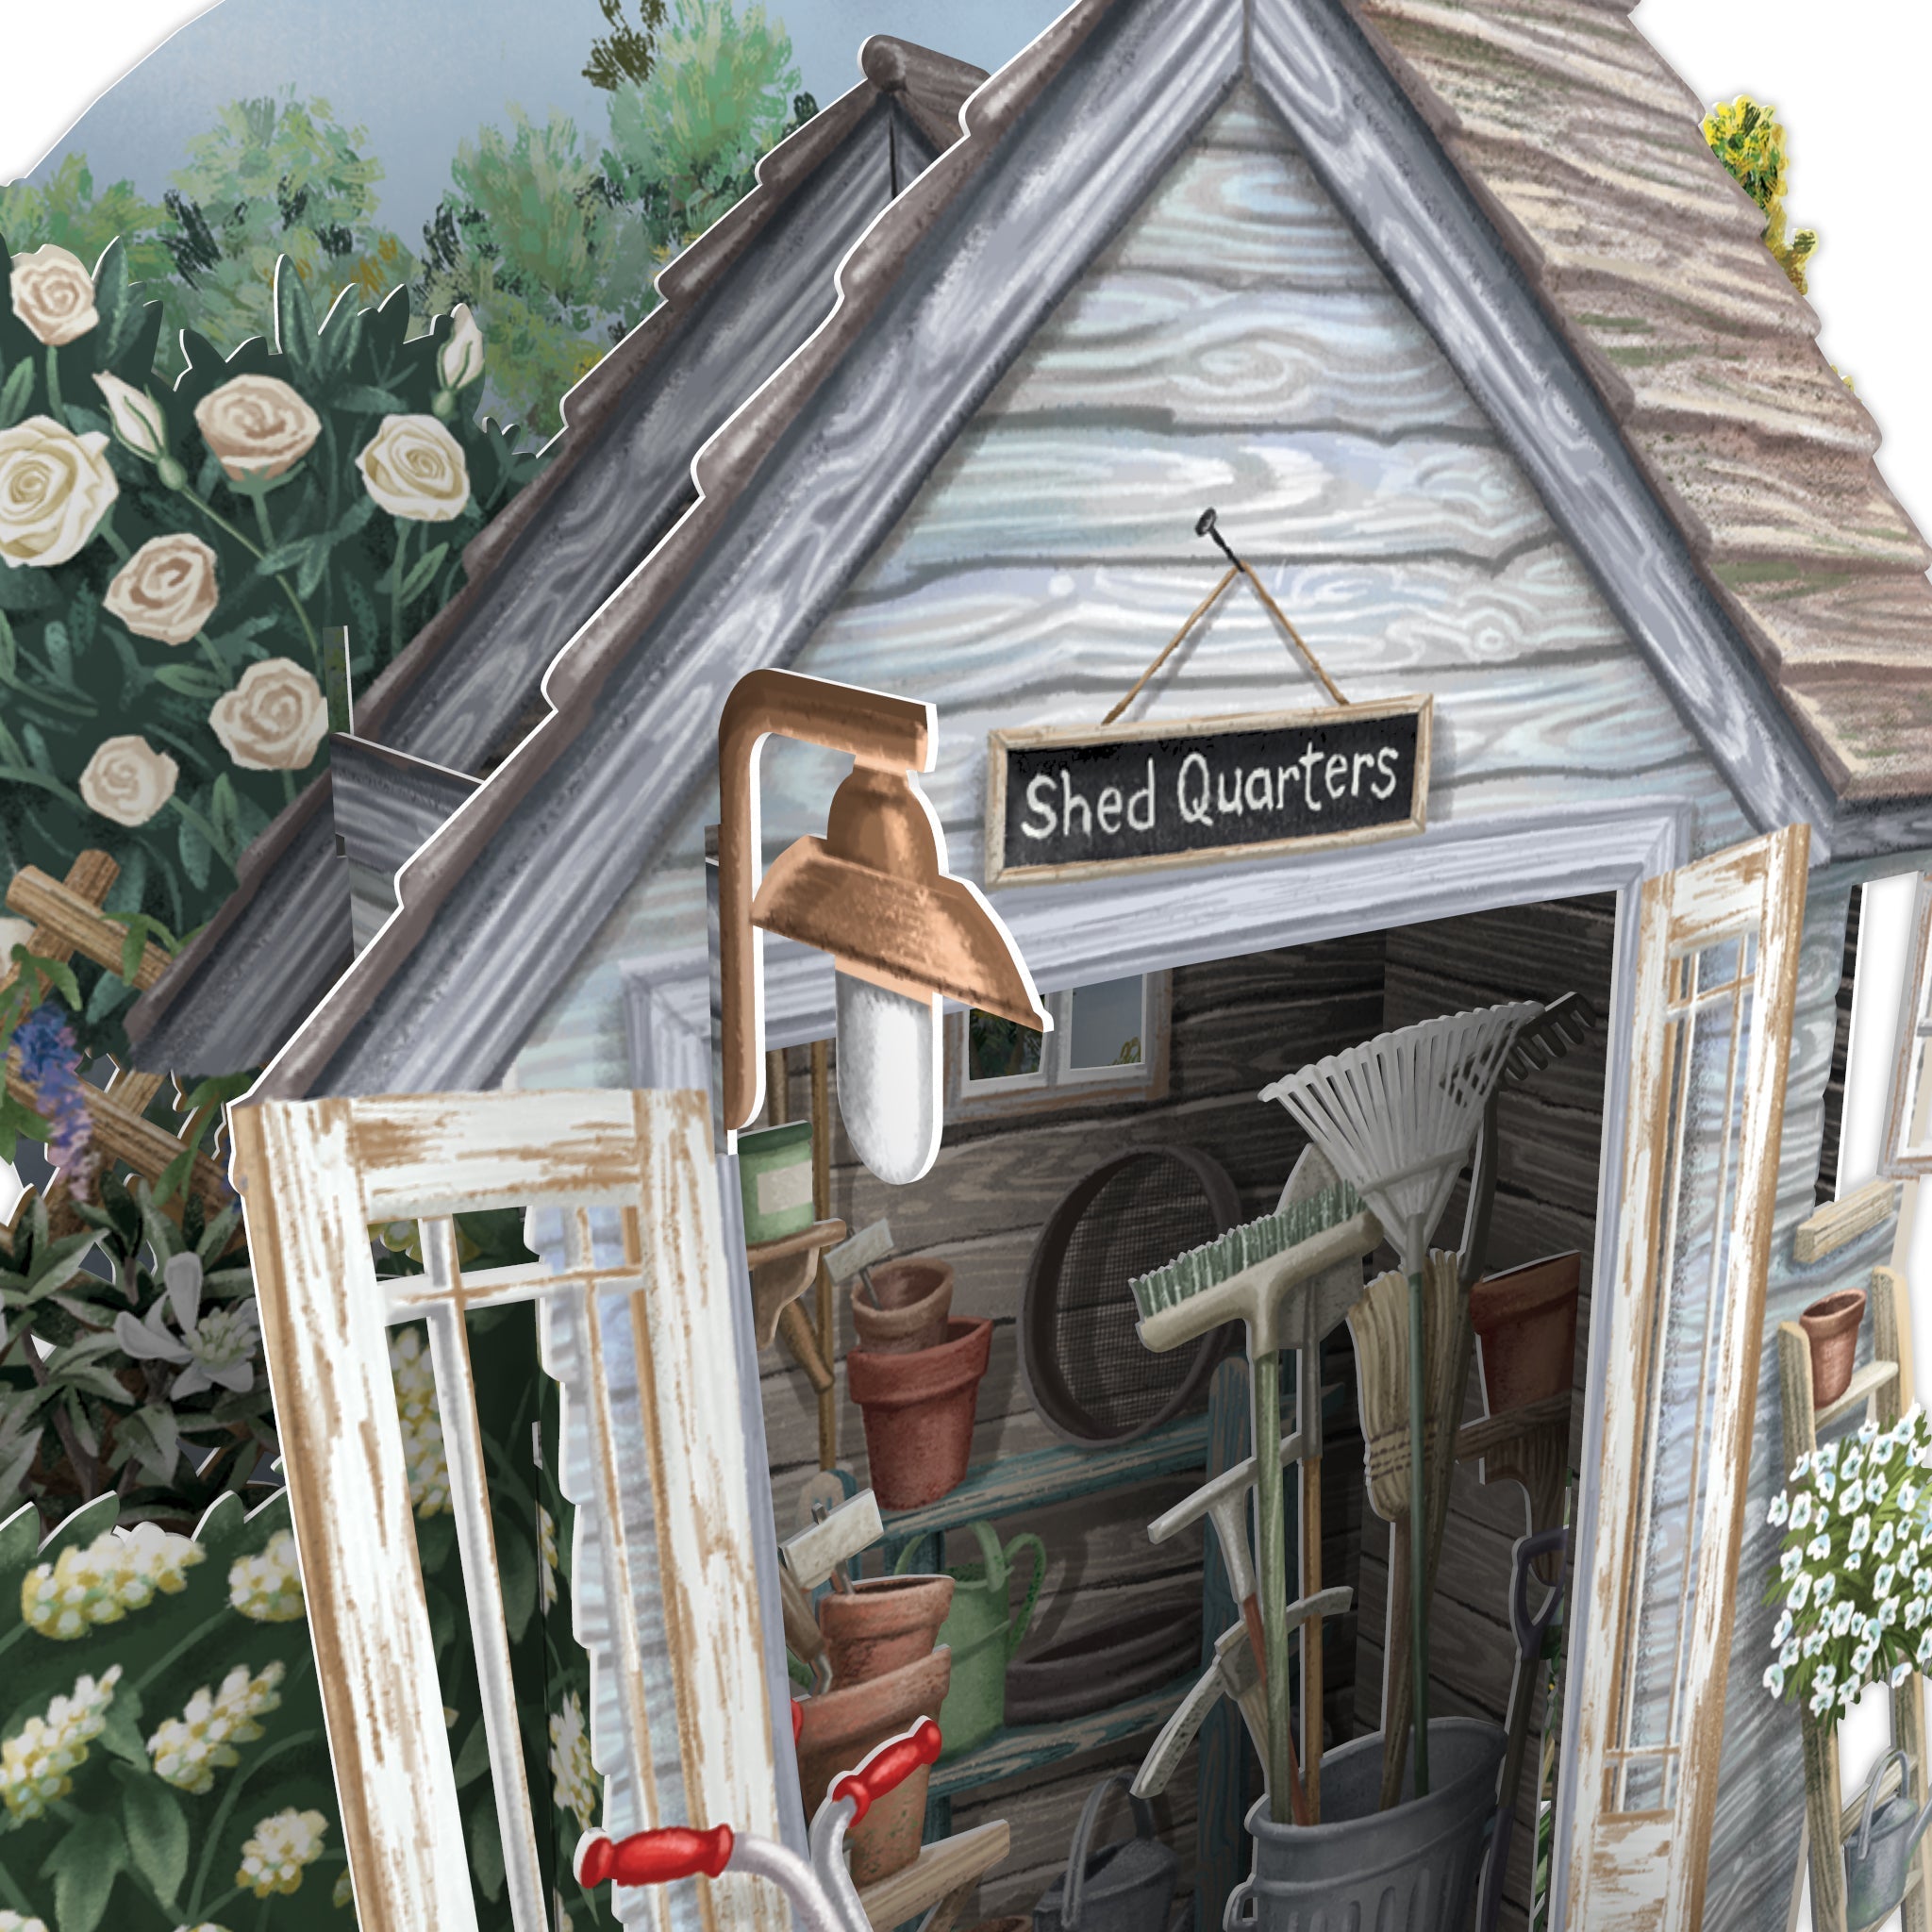 Shed Quarters 3D Pop Up Greetings Card